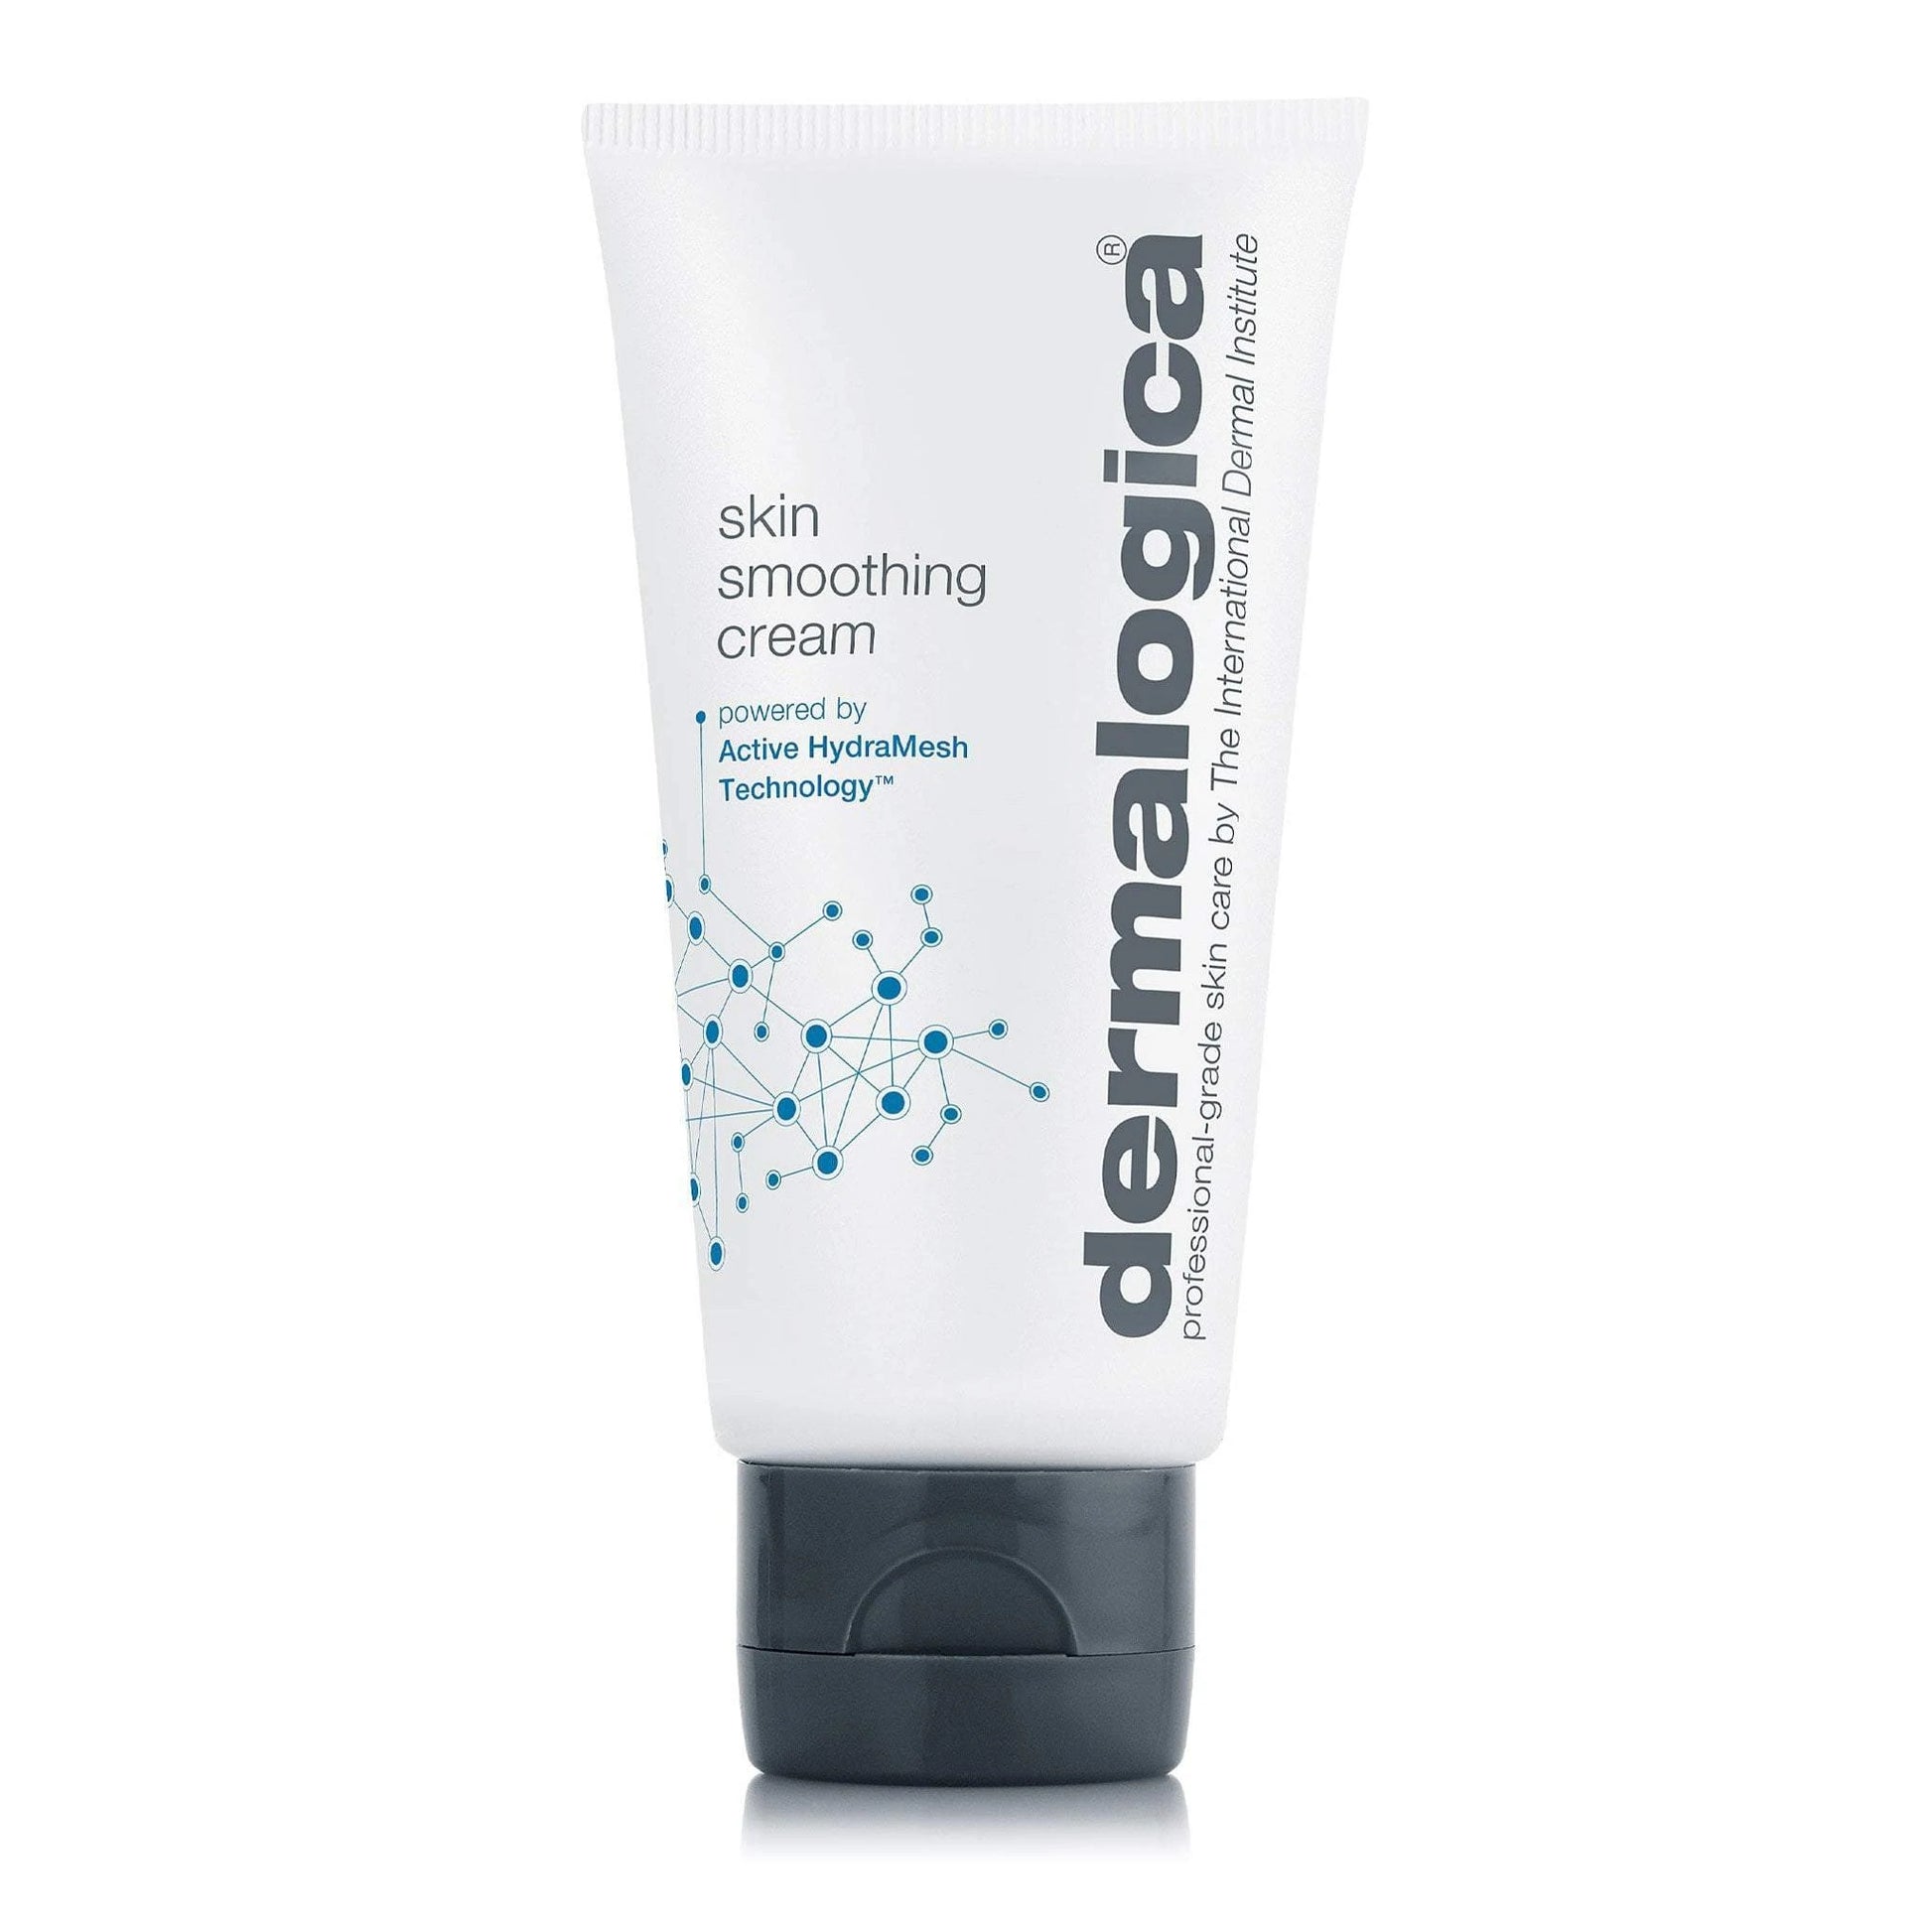 This best-selling moisturizer skin smoothing cream features a state-of-the-art complex that works on a molecular level to help reduce Trans-Epidermal Water Loss (TEWL) and infuse skin with 48 hours of vital moisture. 